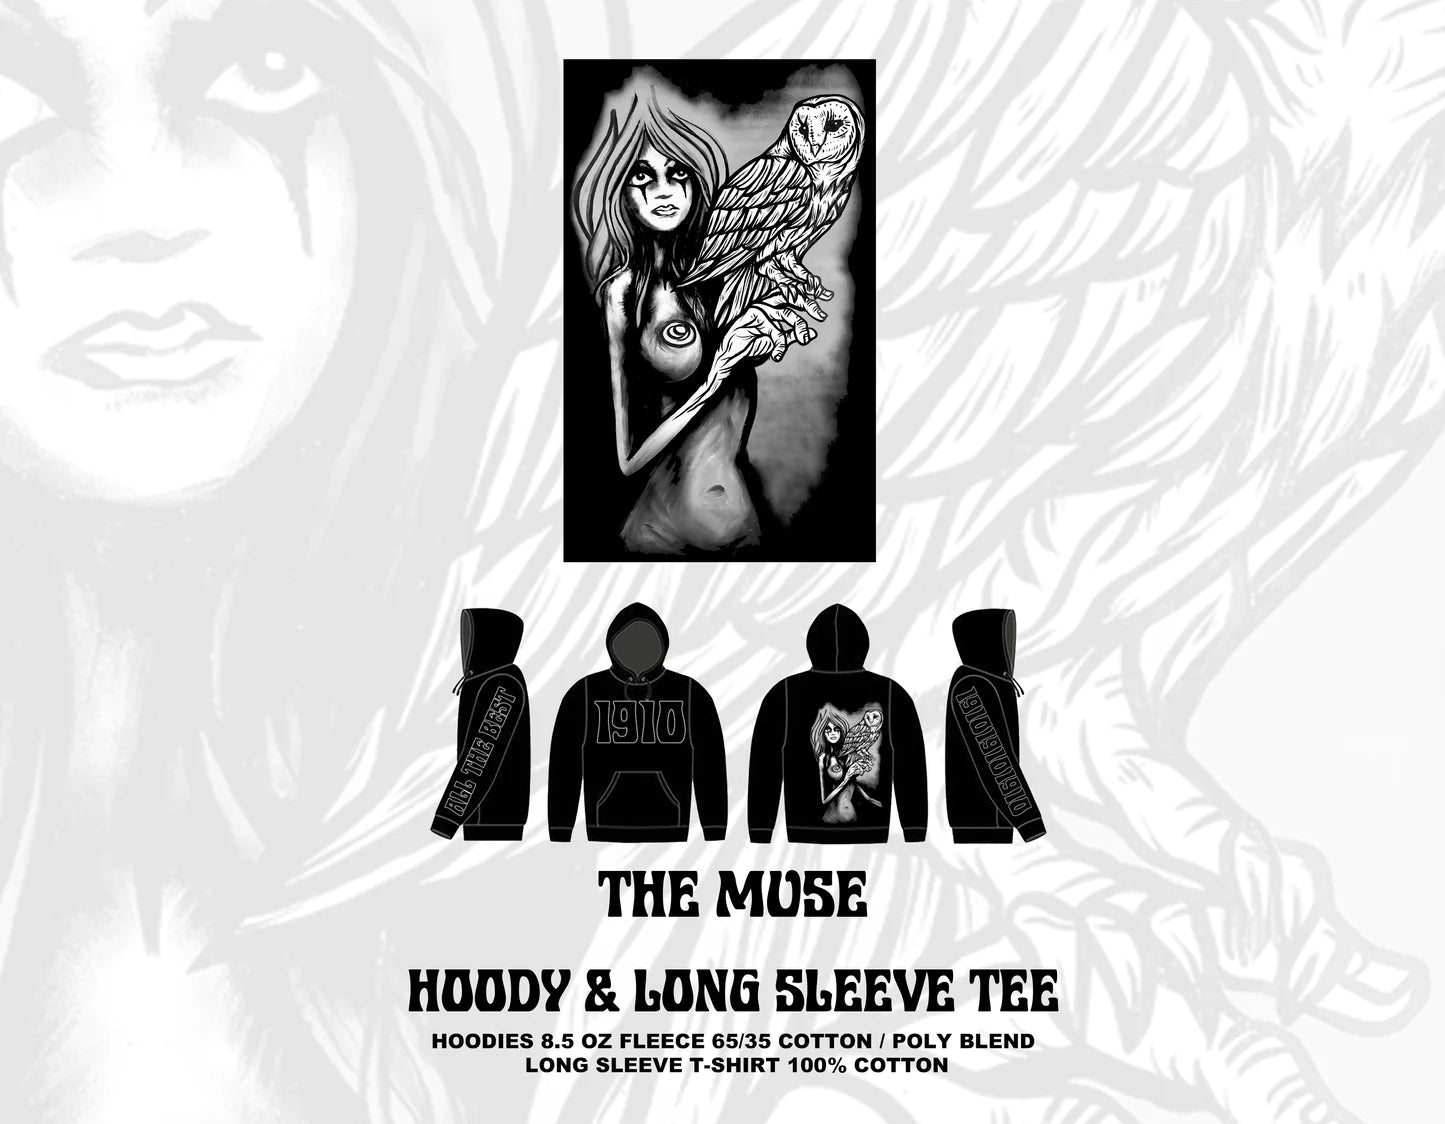 1910 - The Muse Hoody